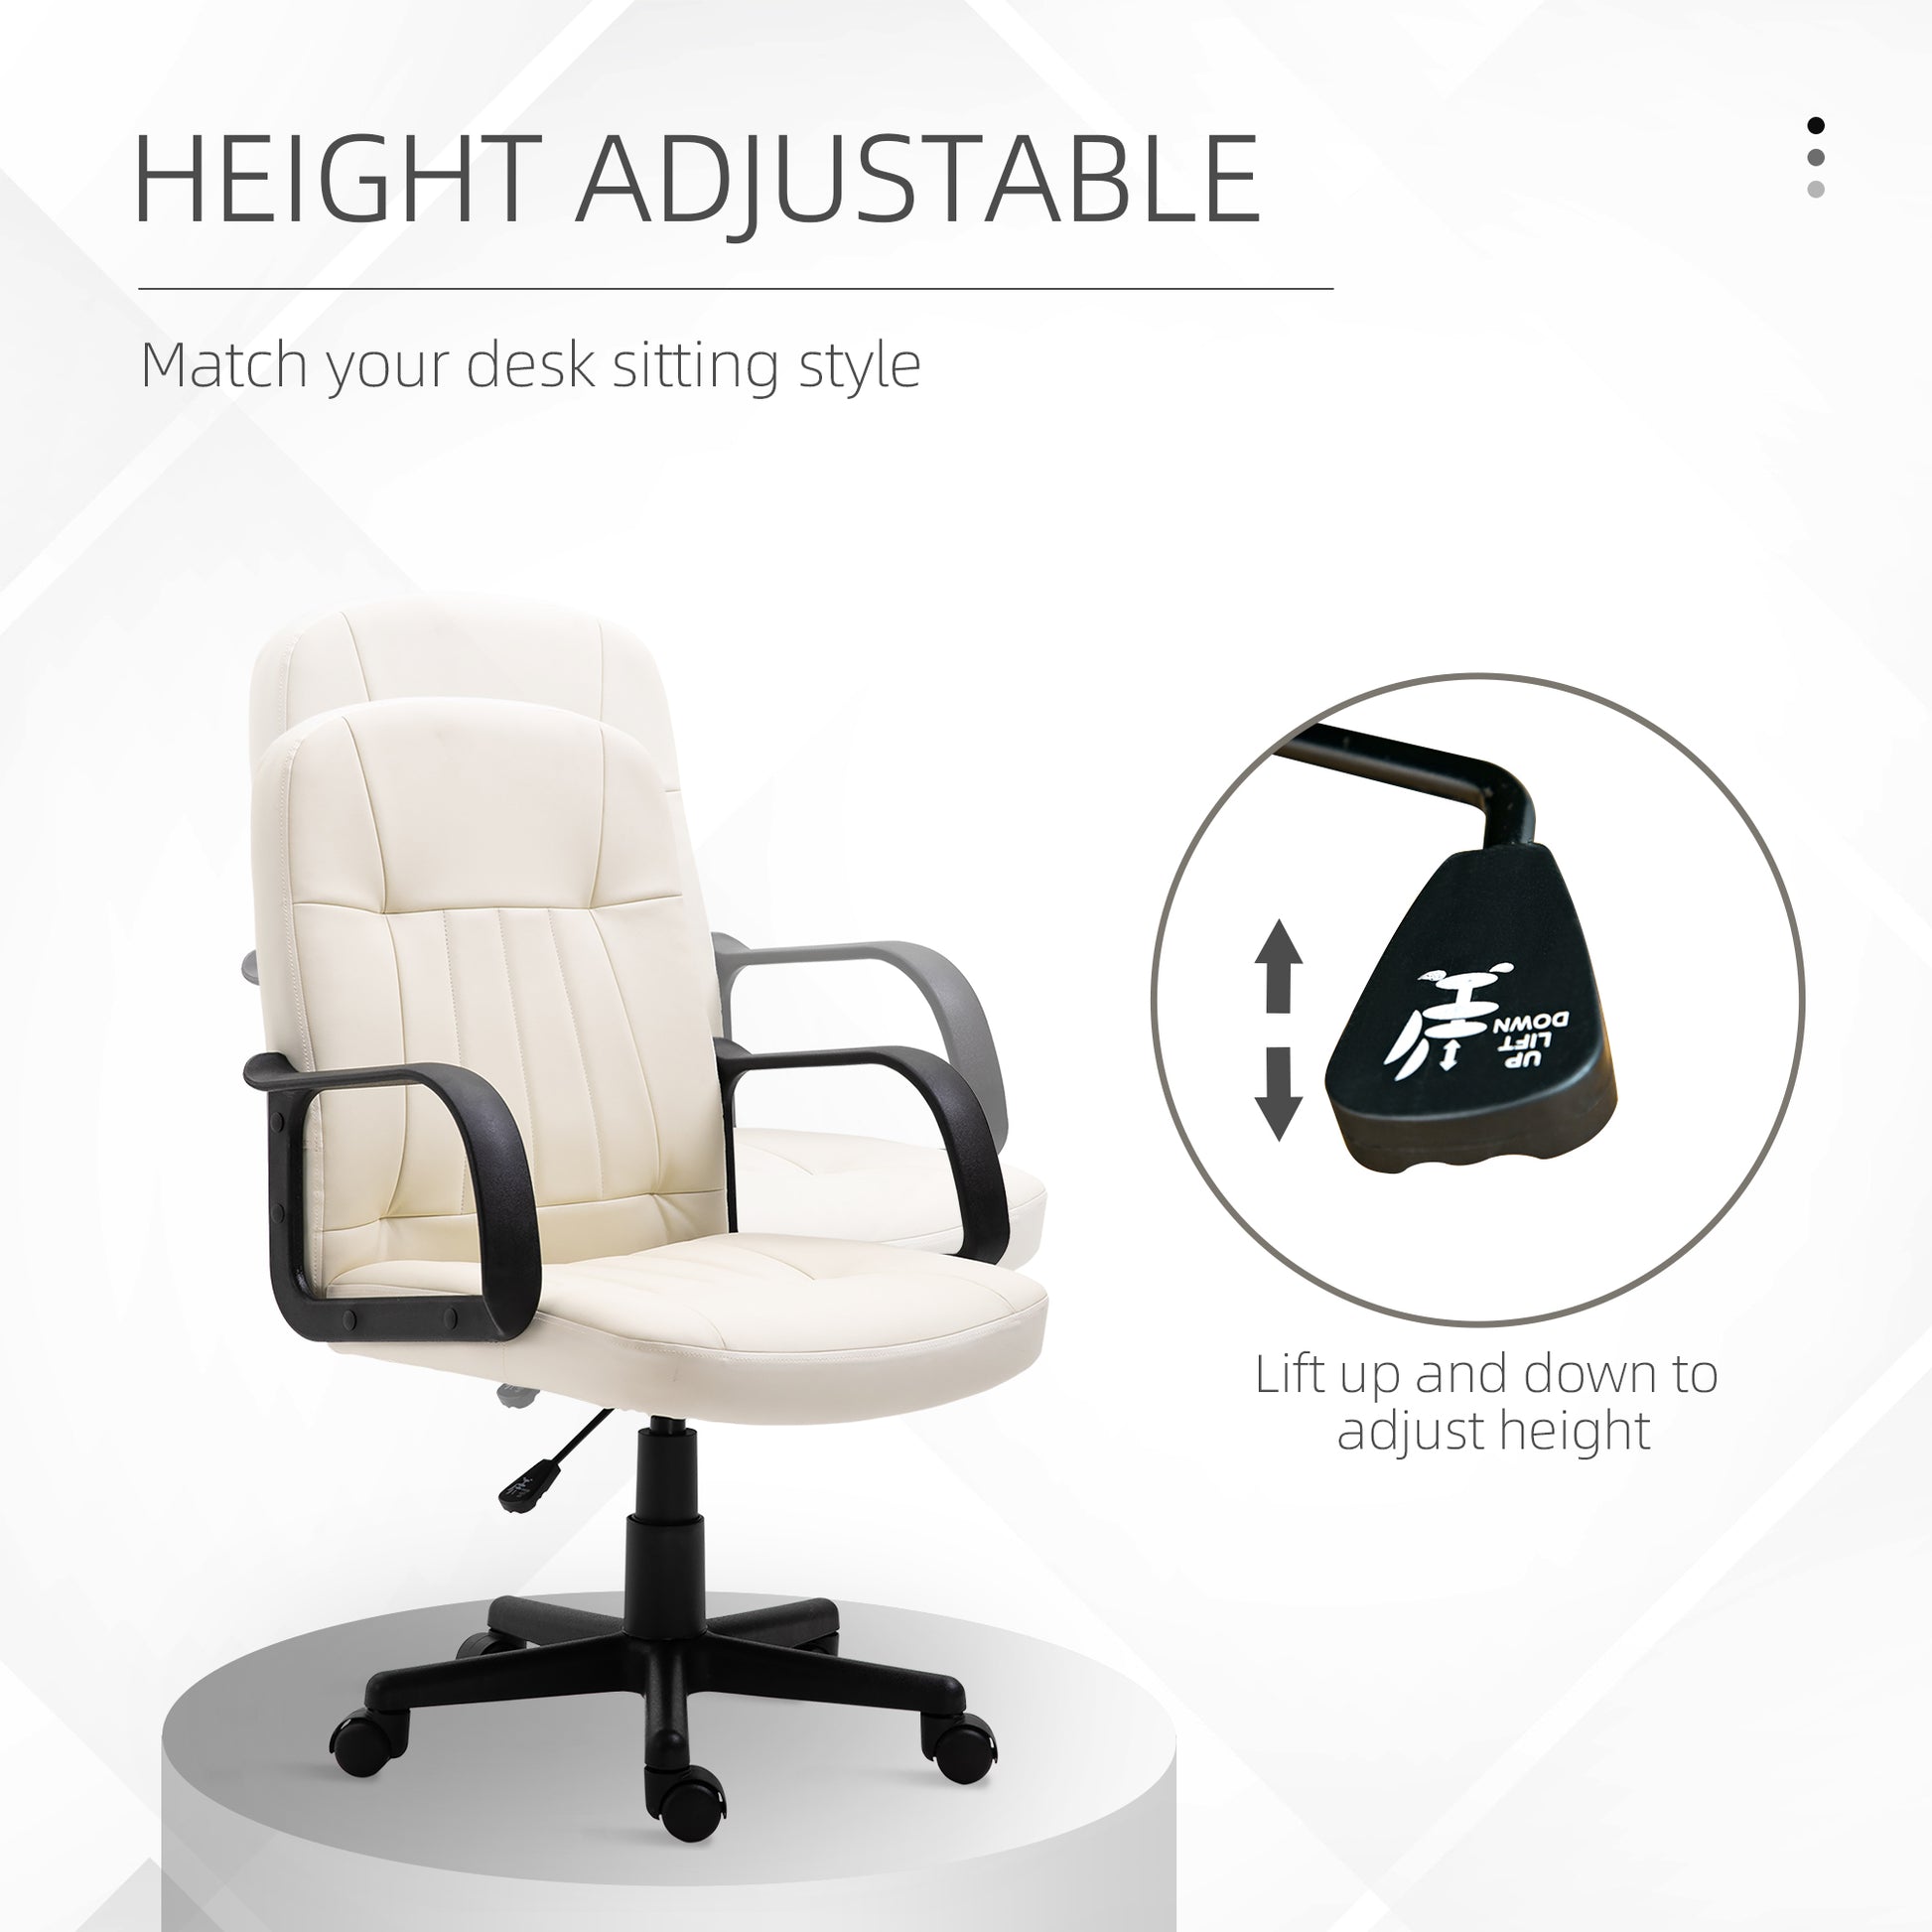 Swivel Executive Office Chair Home, Office Mid Back PU Leather Computer Desk Chair for Adults, Wheels, Cream, HOMCOM, 4